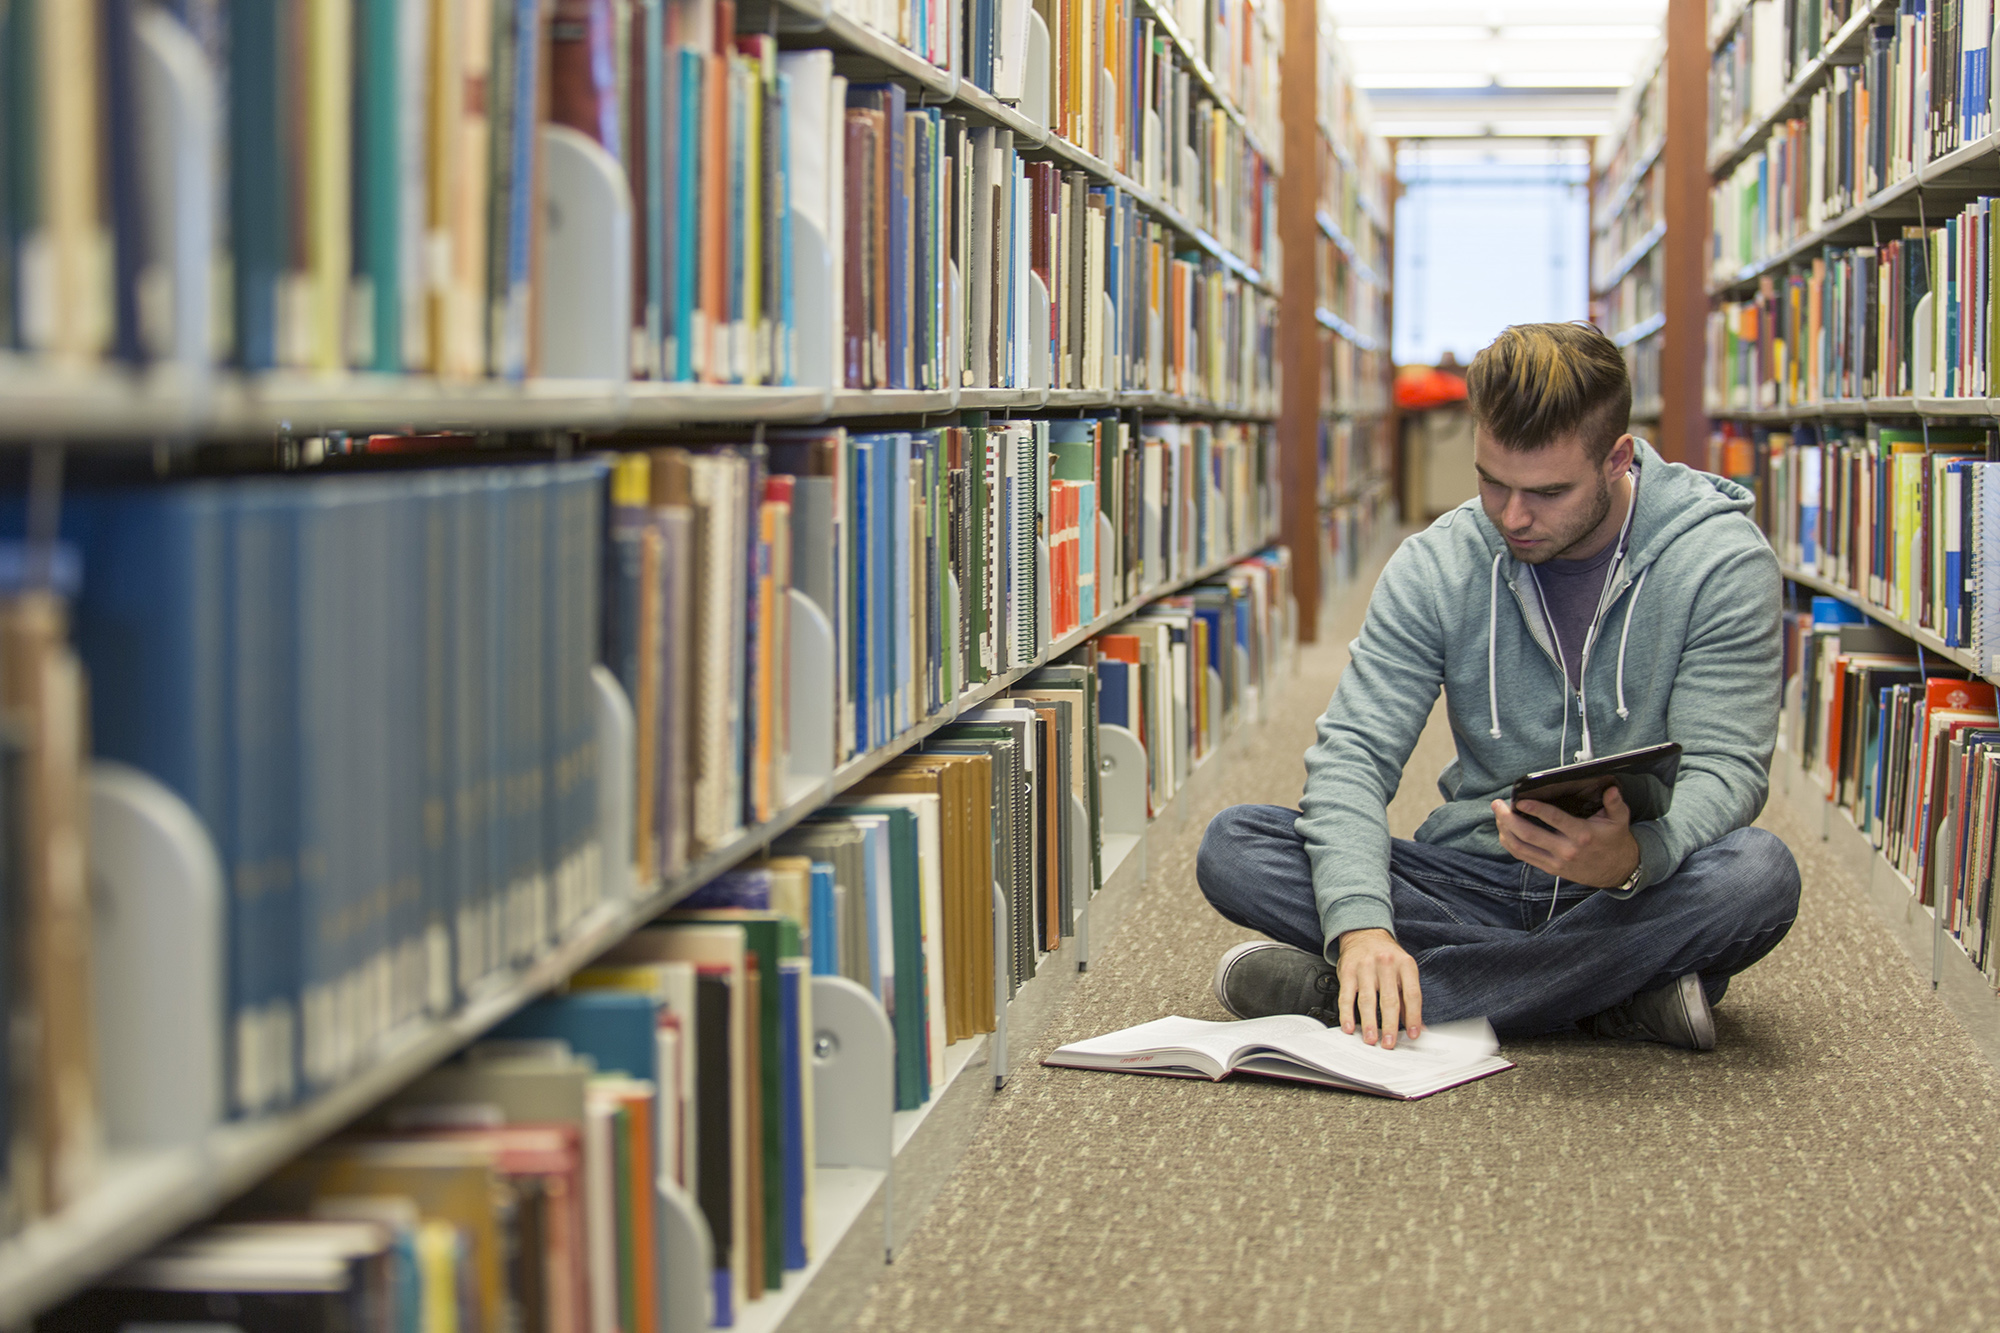 A male student studies between rows of books.